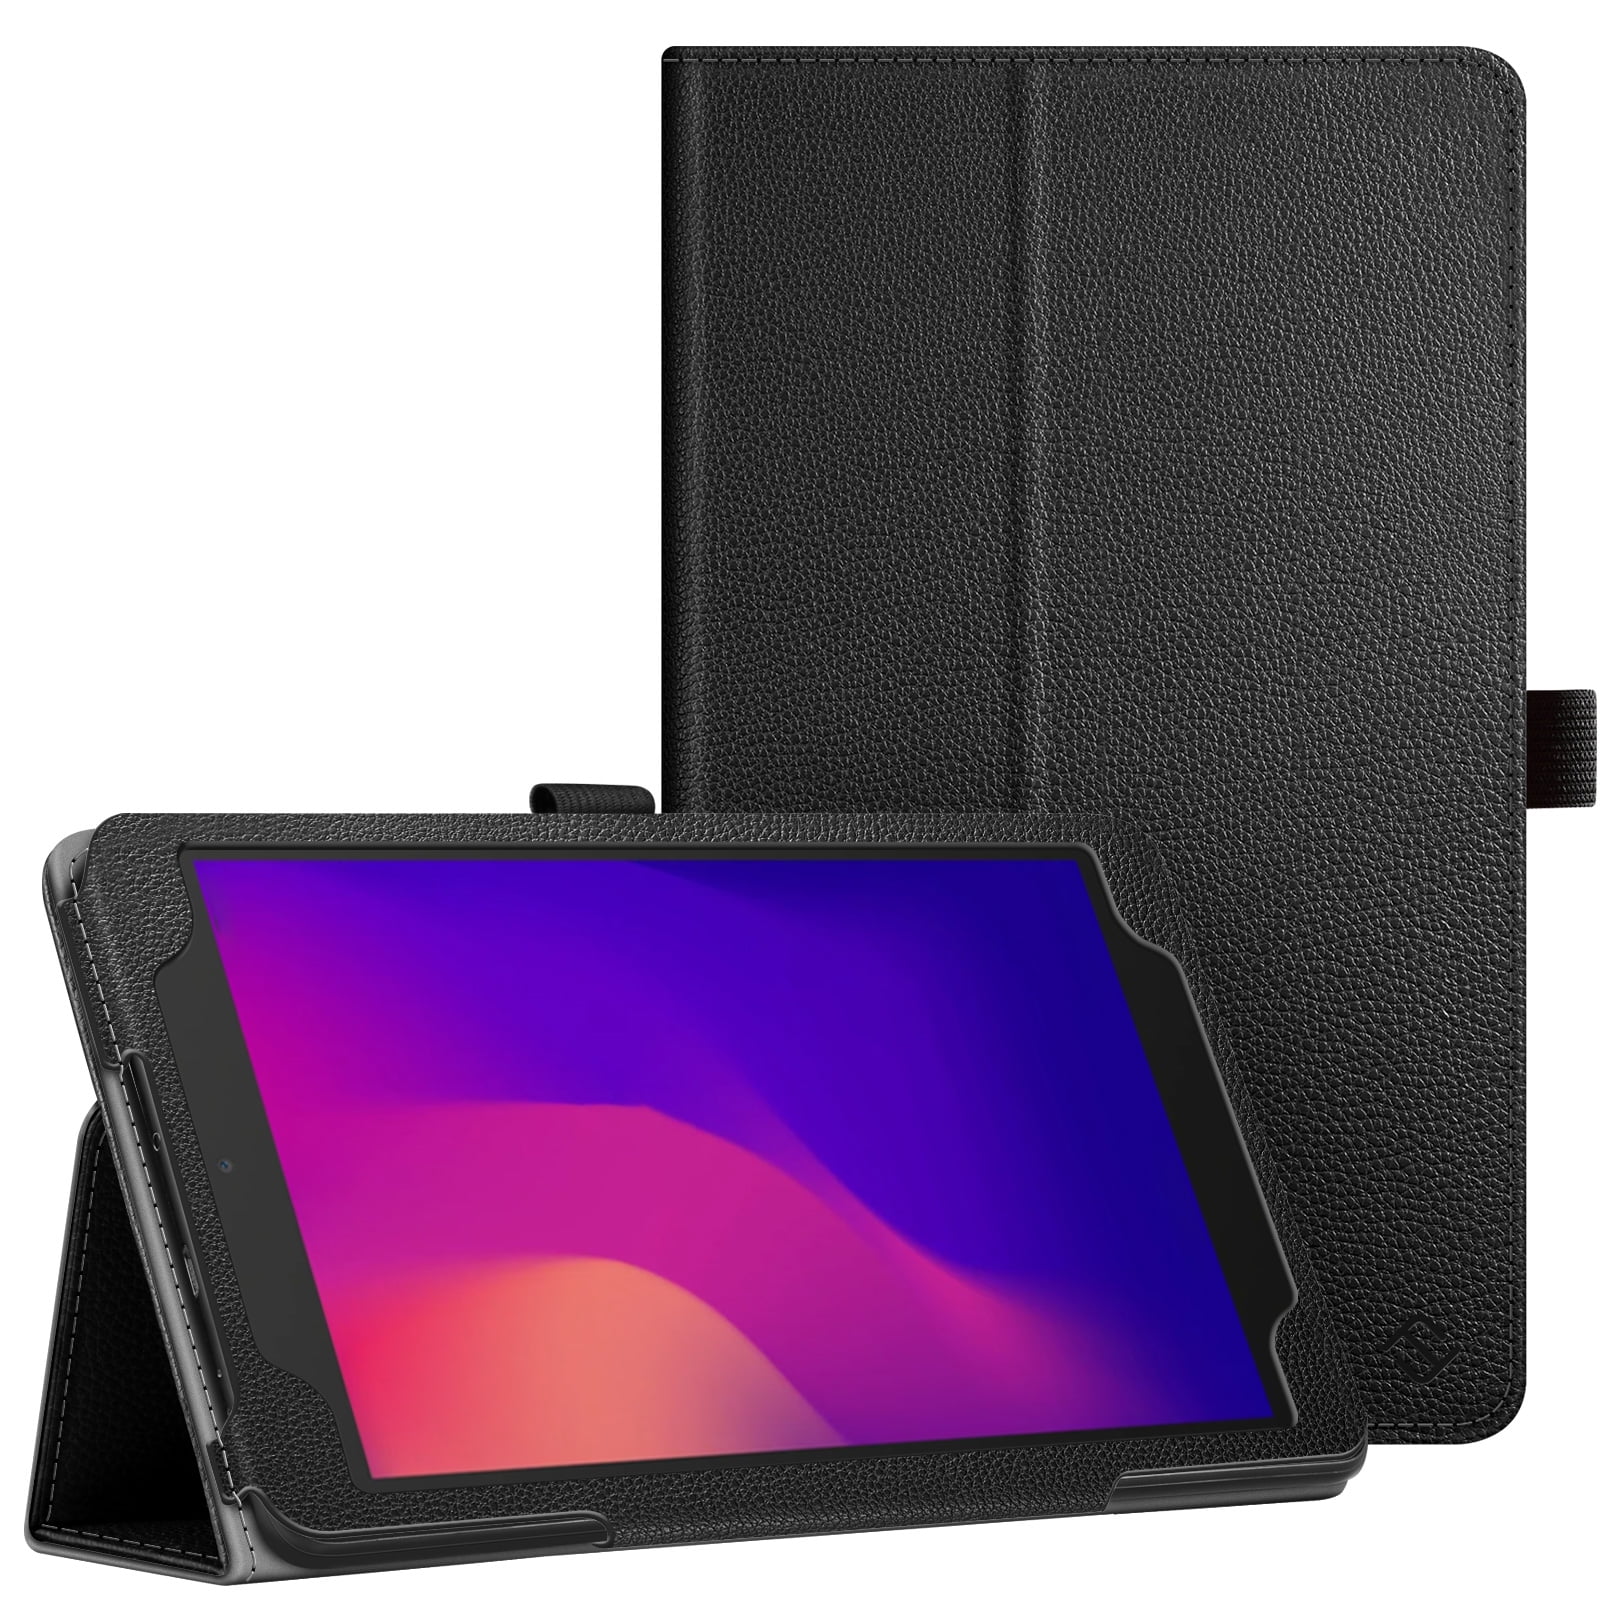 Folio Case for 8-inch Alcatel Joy Tab 2 Tablet (Model: 9032Z) 2020 - Fintie Protective Premium Leather Stand Cover with Pencil Holder for Alcatel Joy Tab 2 8.0" Tablet, Black -